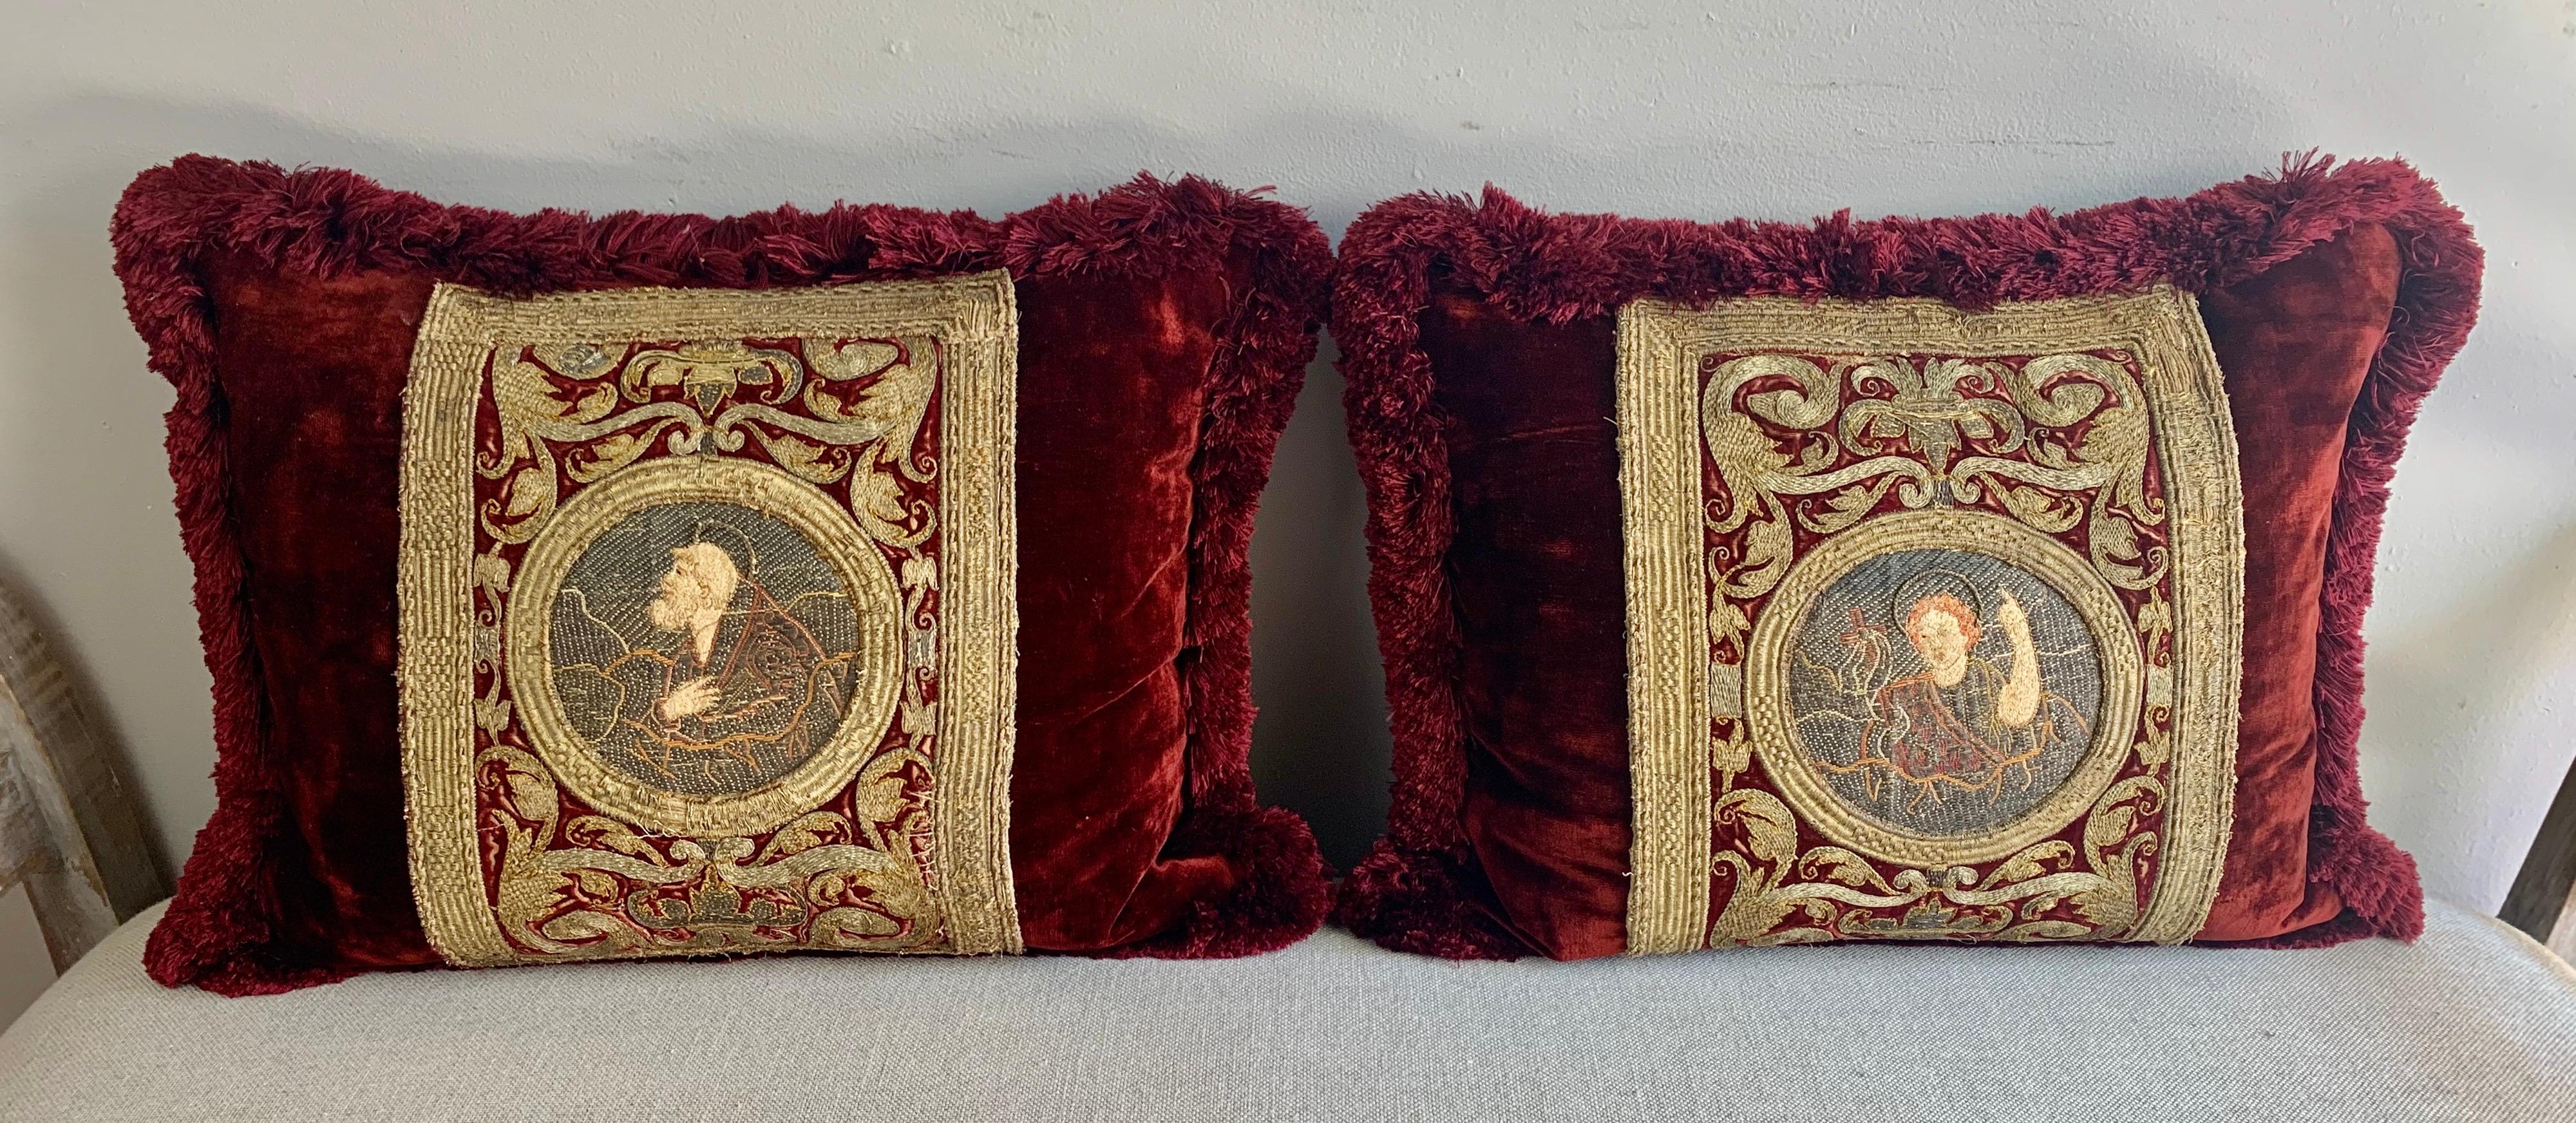 Pair of incredibly fine 18th century metallic and silk embroidered red and gold textile pillows. The pillows depict religious apostles centered in cartouches and surrounded by more incredible embroidery throughout. Silk taffeta backs, multicolored